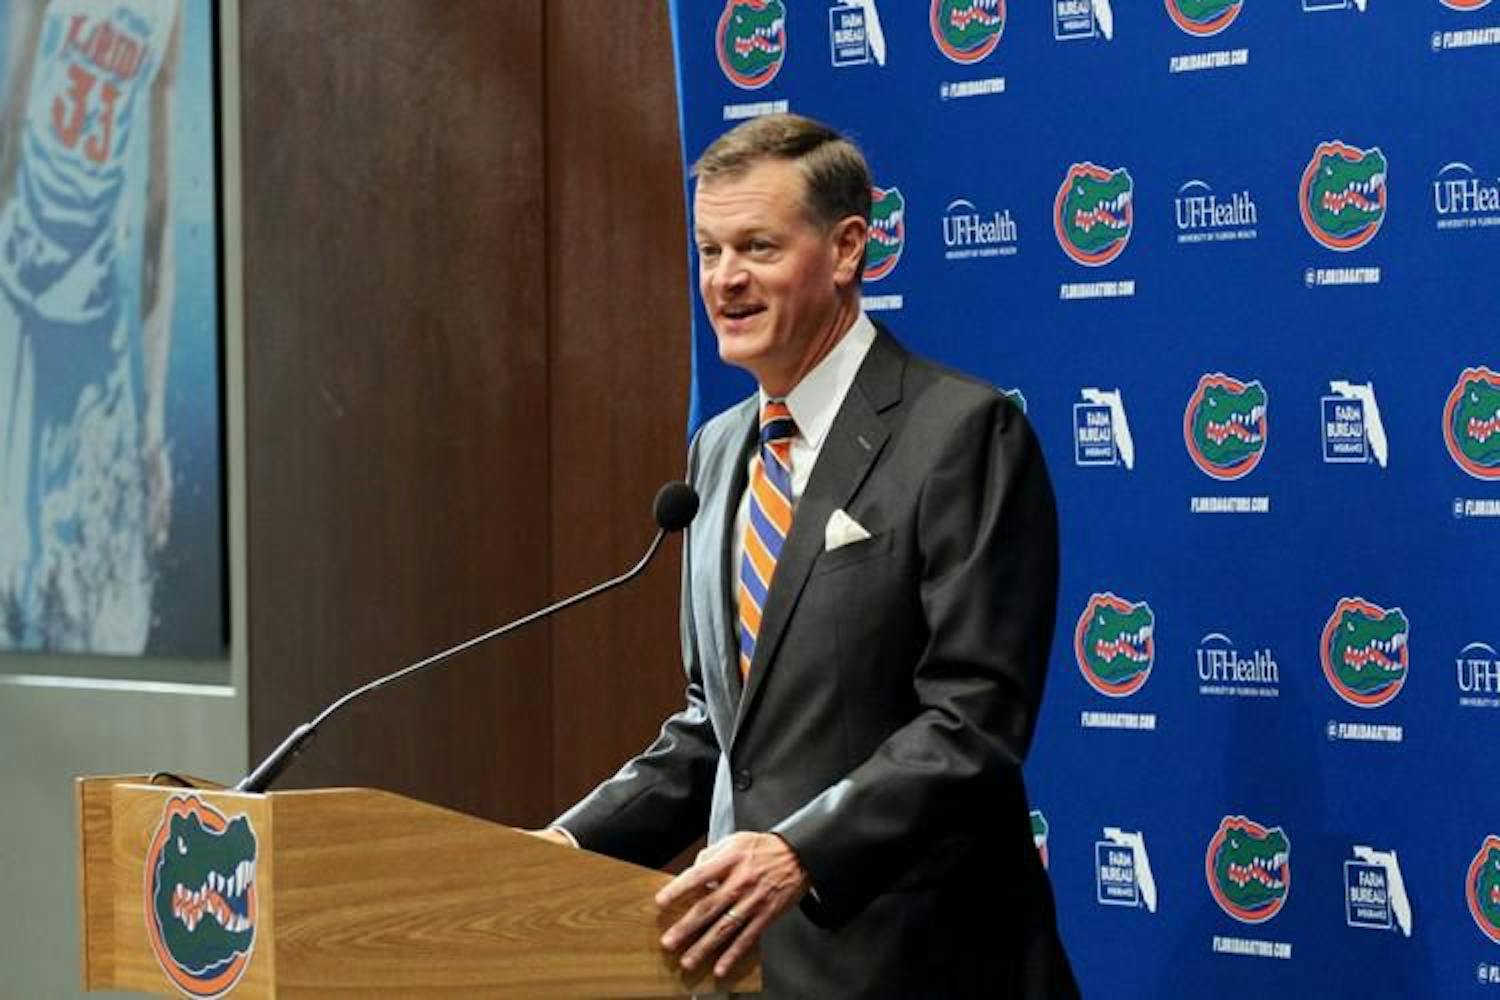 Athletic director Scott Stricklin plans for Florida athletics to have full capacity for fall sports in 2021 